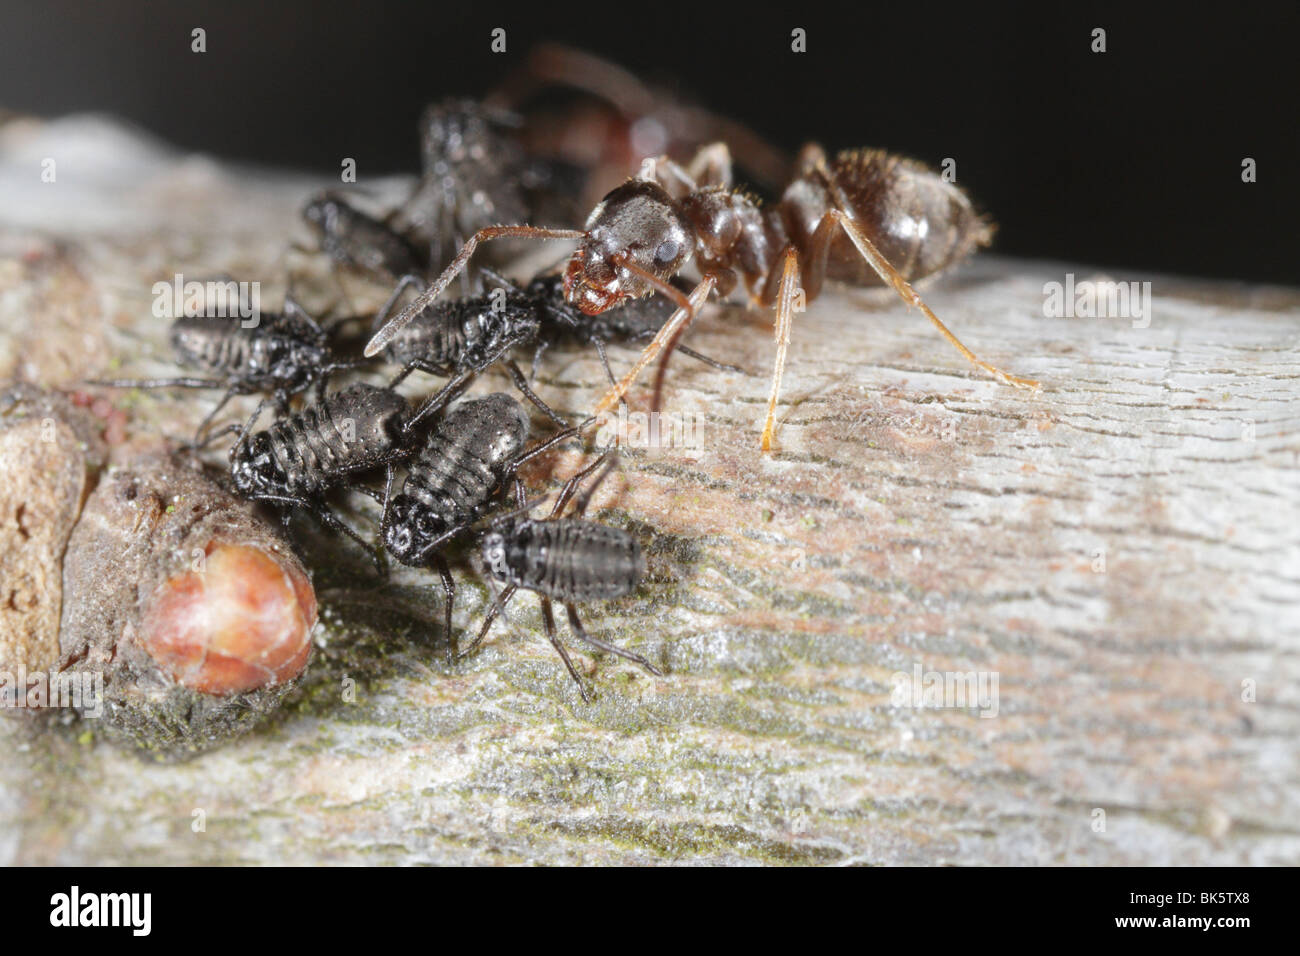 Ants (Lasius niger, Black Garden Ant) tending to aphids (Lachnus roboris) on an oak tree. The ant defends the aphids. Stock Photo